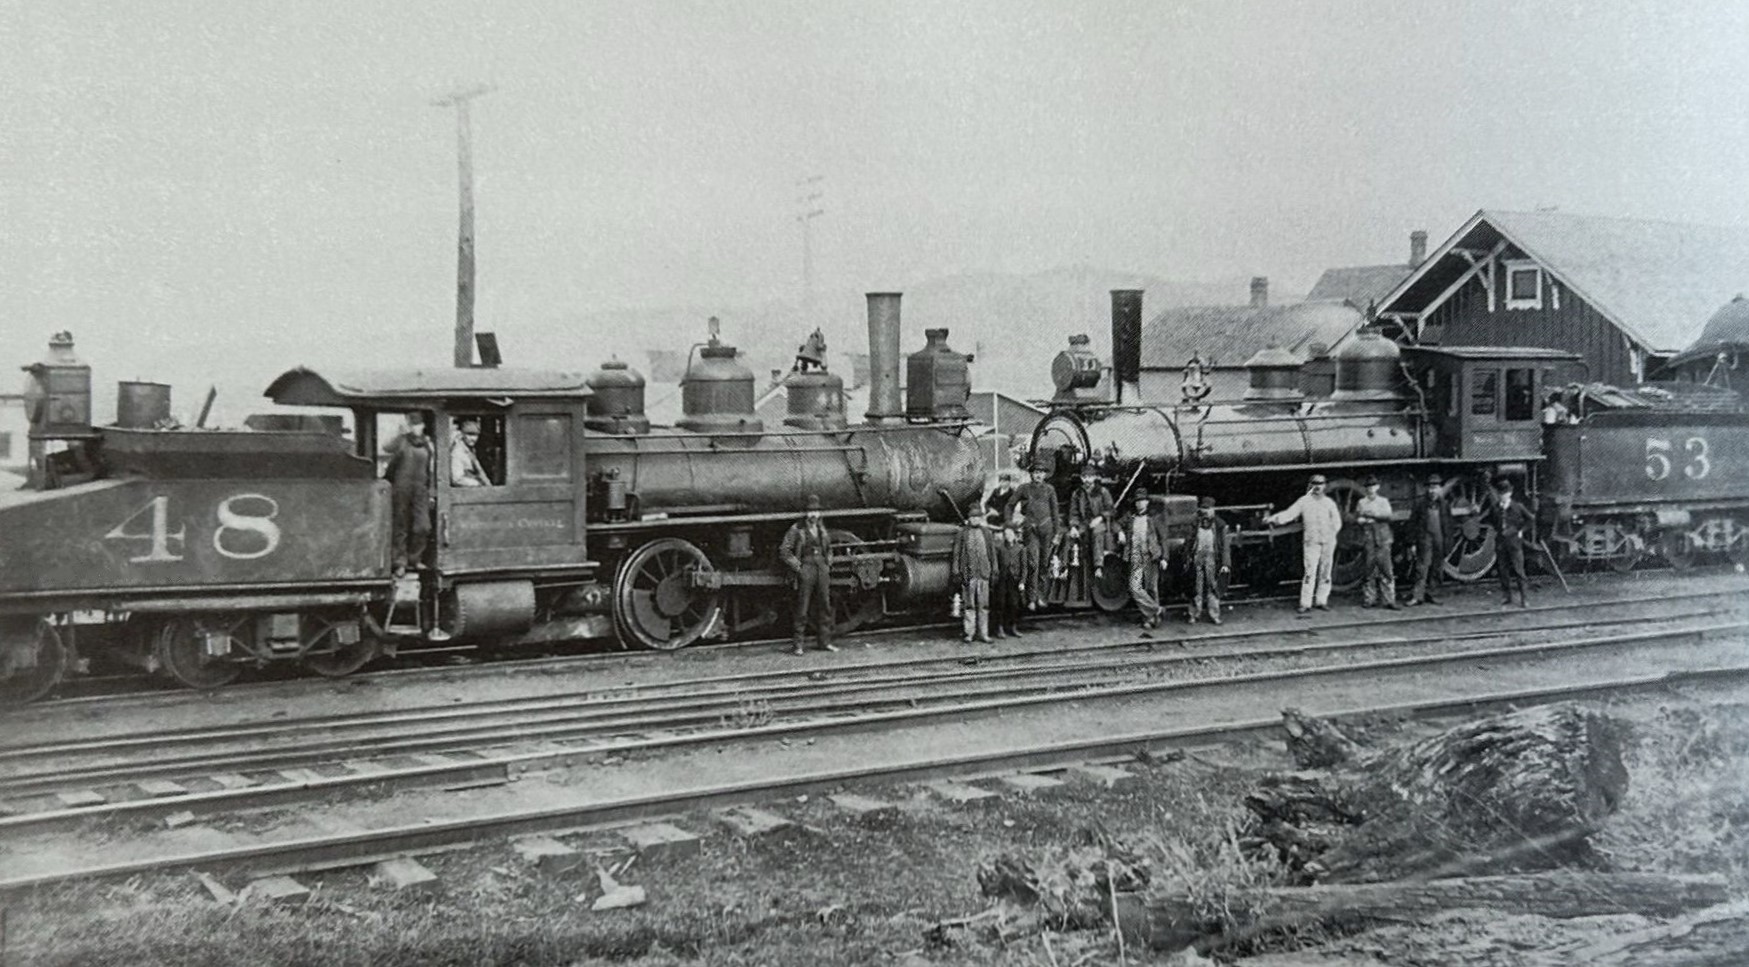 Two trains pose at Bessemer depot